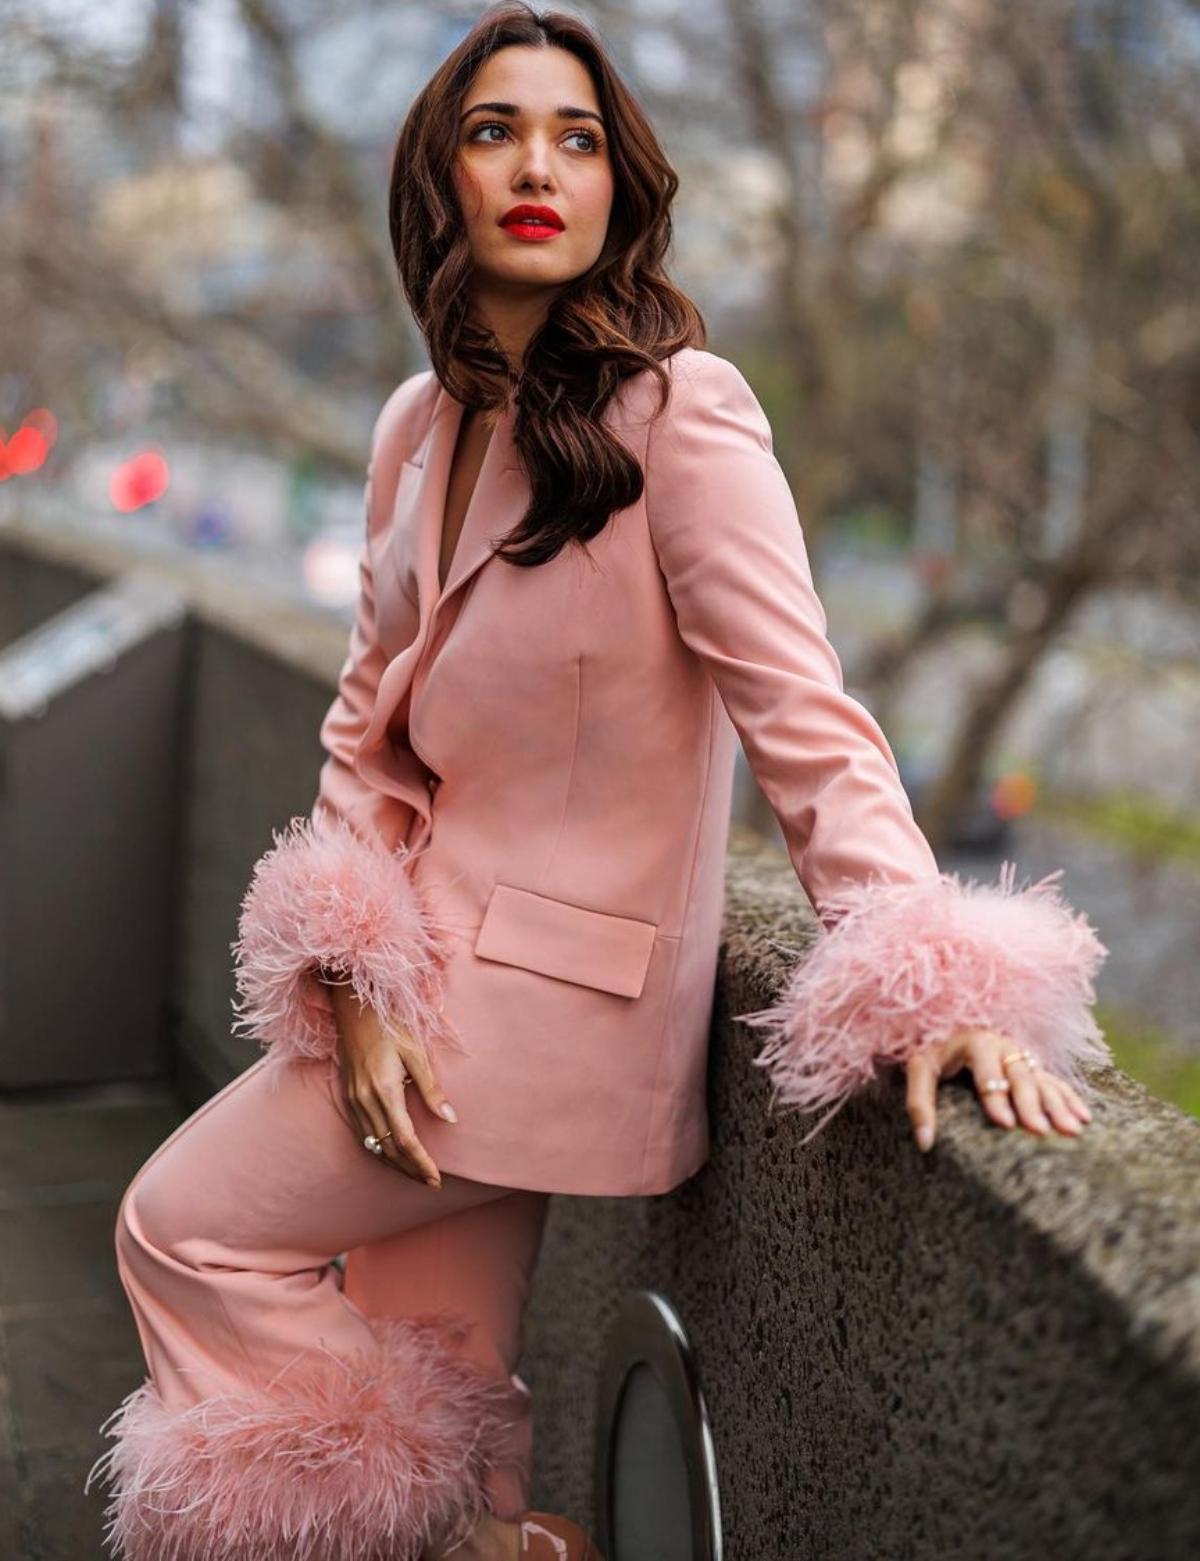 The beguiling beauty who always puts her best fashion forward sent shockwaves all over when she flaunted a chic blush pink pant suit in the streets of Melbourne. Her dreamy pantsuit which consisted a blush pink blazer and a matching pants was all about grace and elegance. The feather deatilings on the cuffs and hemline gave a glamorous vibe to her otherwise formal outfit. The 'Baahubali' star accessorised her dreamy outfit with beige pointed high heels, statement pearl gold rings and matching pearl drop earrings. With blushed cheeks, subtle eye shadow and centre-parted open hair-do, Tamannaah simply looked dazzling. The star looked ravishing as ever in her bold red lipstick.